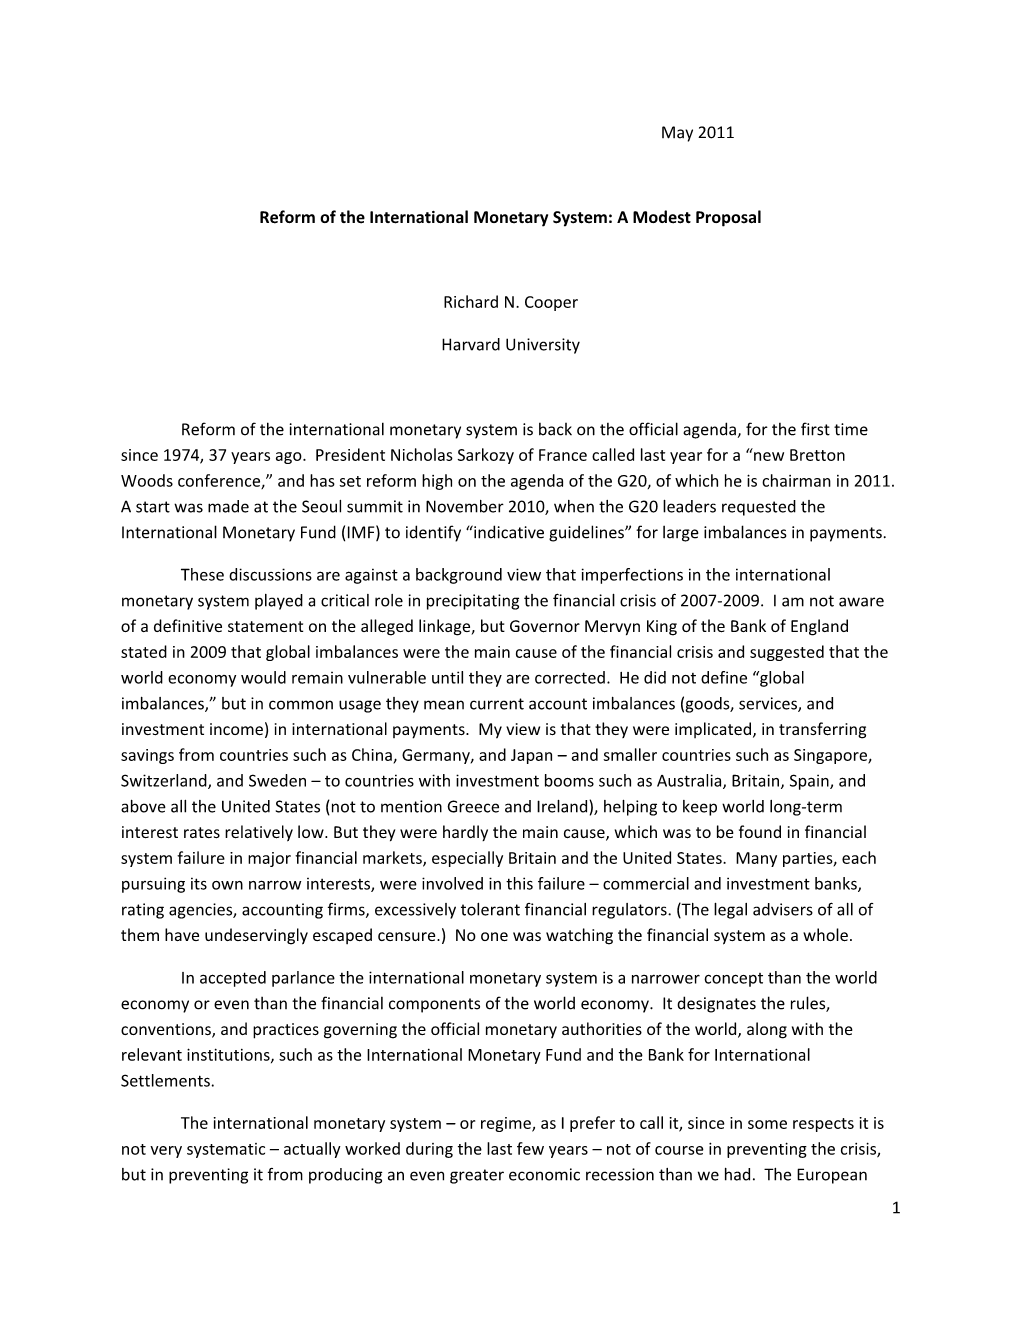 Reform of the International Monetary System: a Modest Proposal